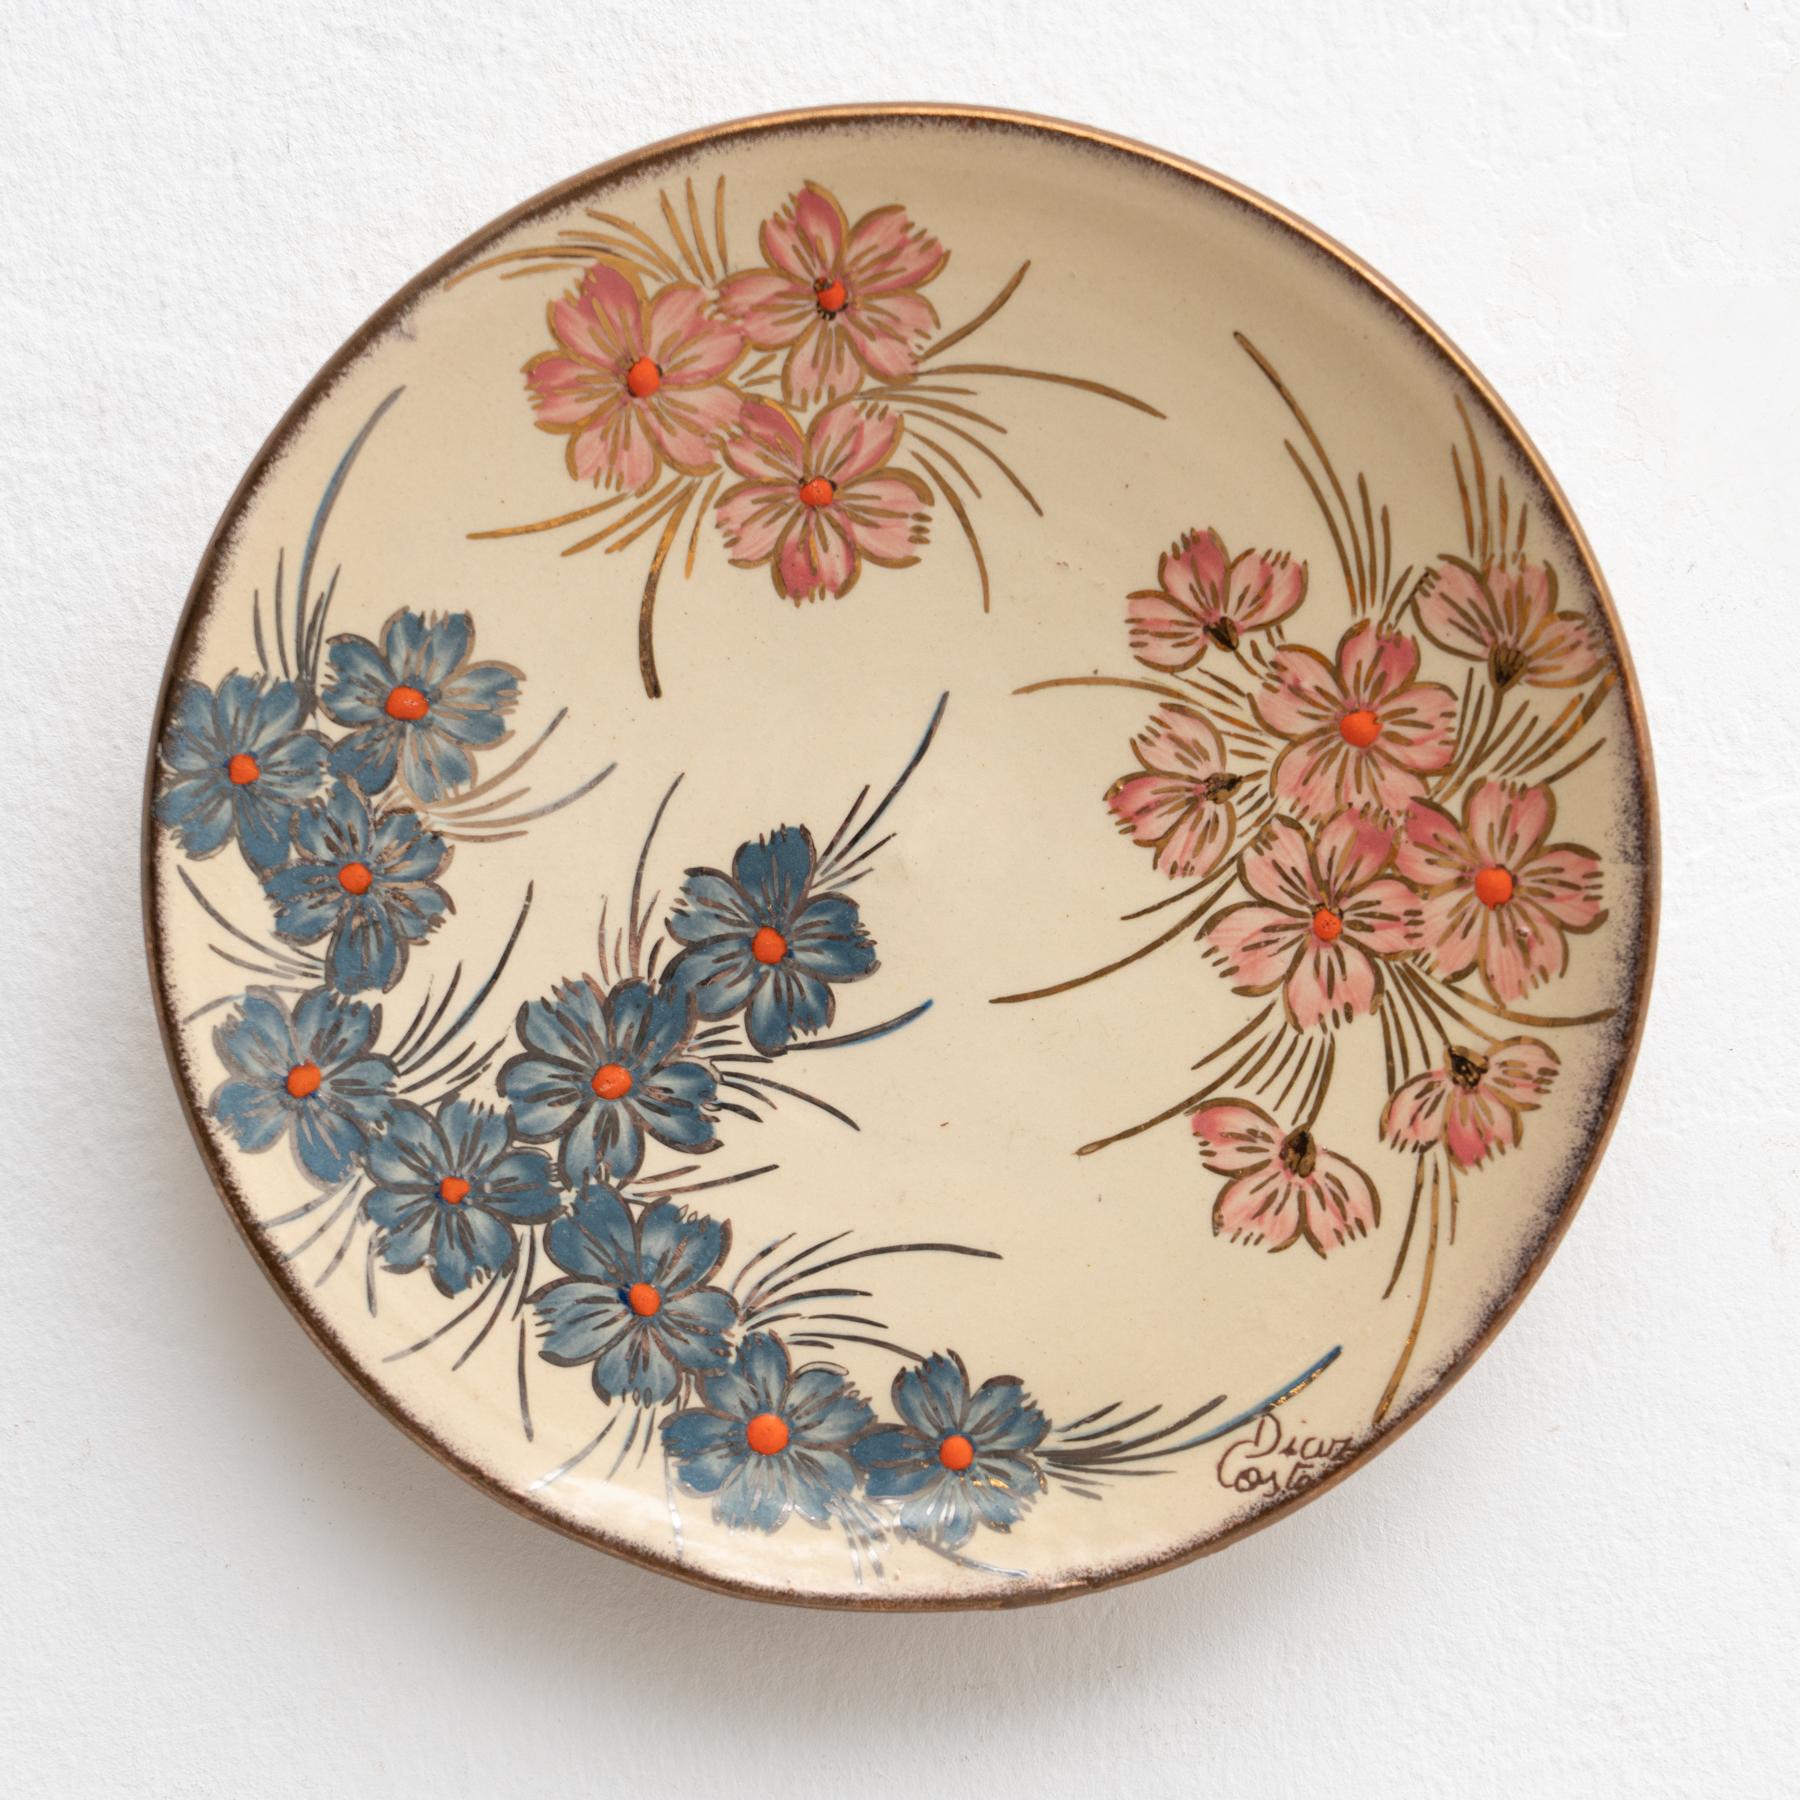 Mid-Century Modern Ceramic Traditional Hand Painted Plate by Catalan Artist Diaz COSTA, circa 1960 For Sale